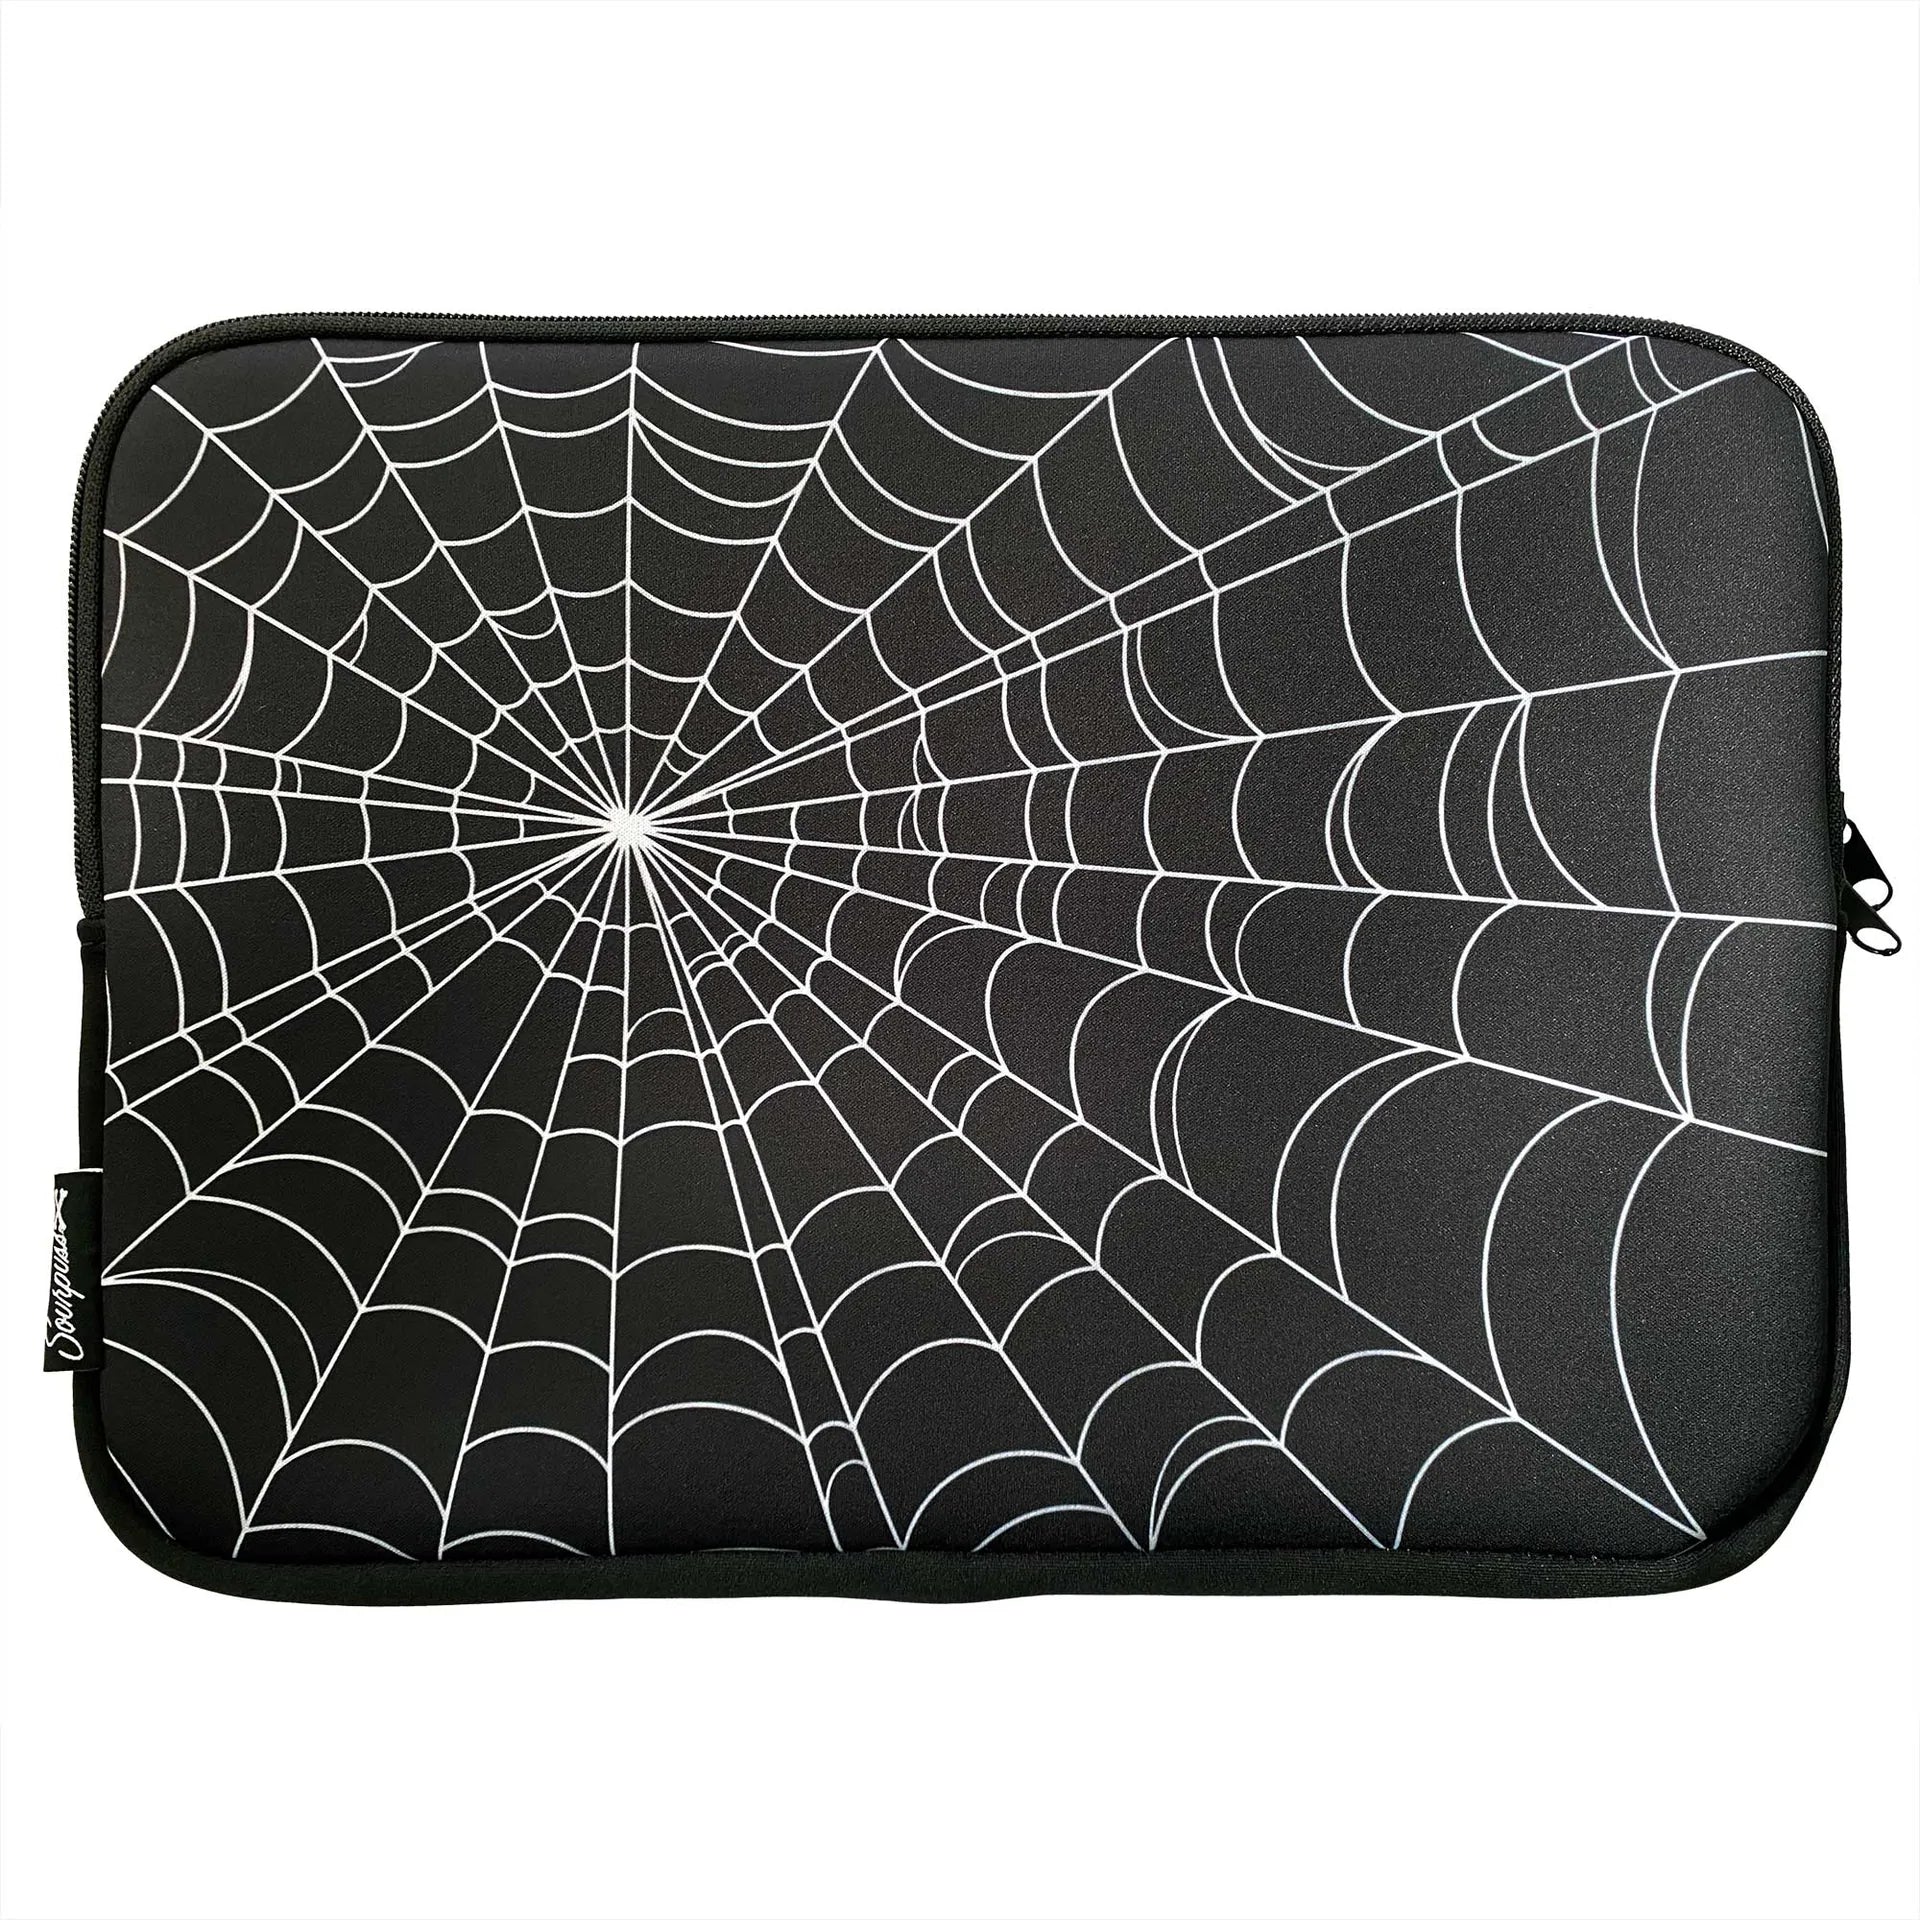 A black neoprene laptop sleeve printed with a white spiderweb pattern.